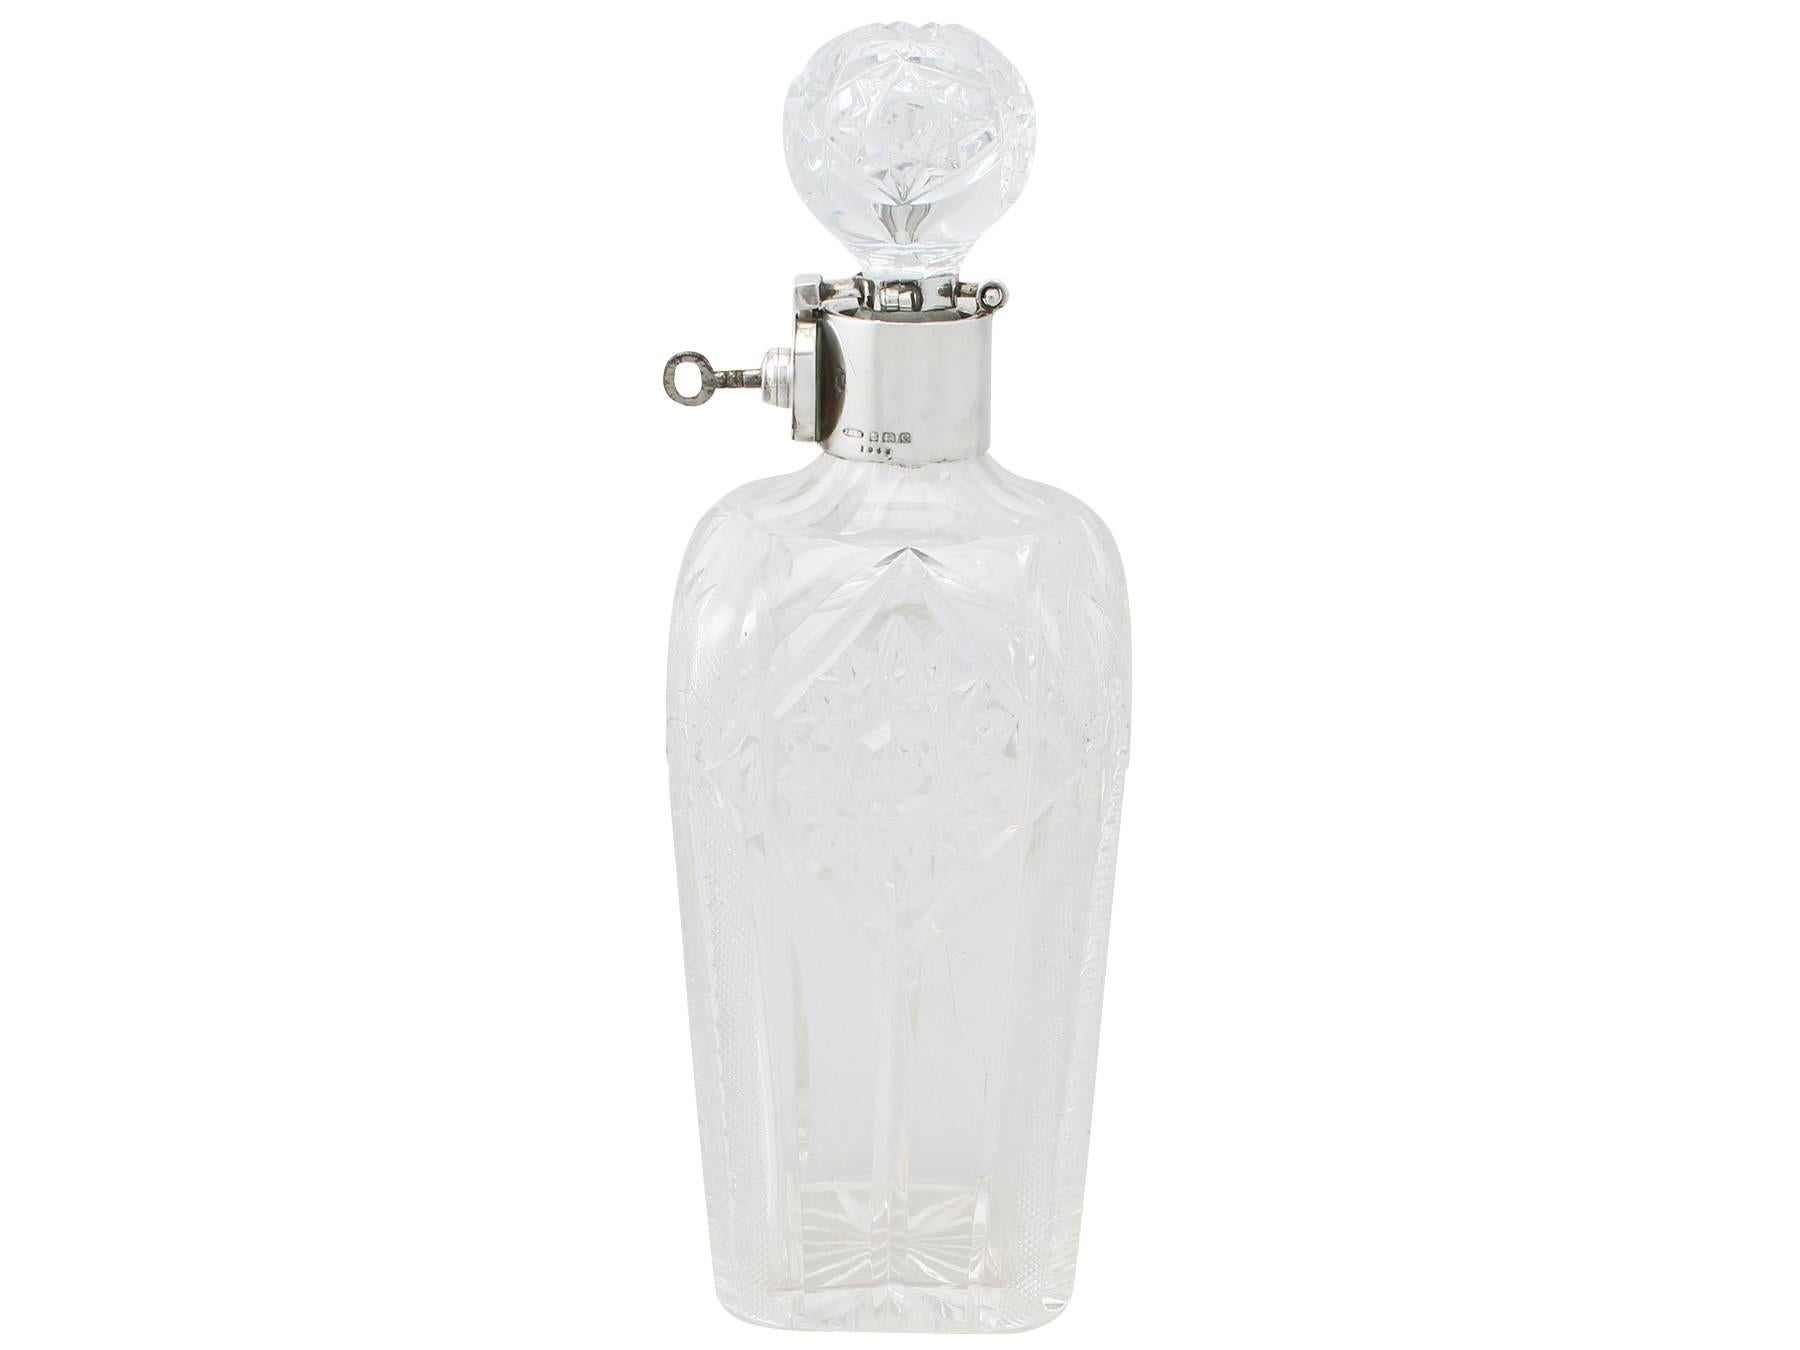 A fine and impressive, unusual antique George V English cut glass and sterling silver mounted locking decanter; an addition to our sterling silver lounge collection.

This fine antique George V cut glass and sterling silver mounted decanter has a